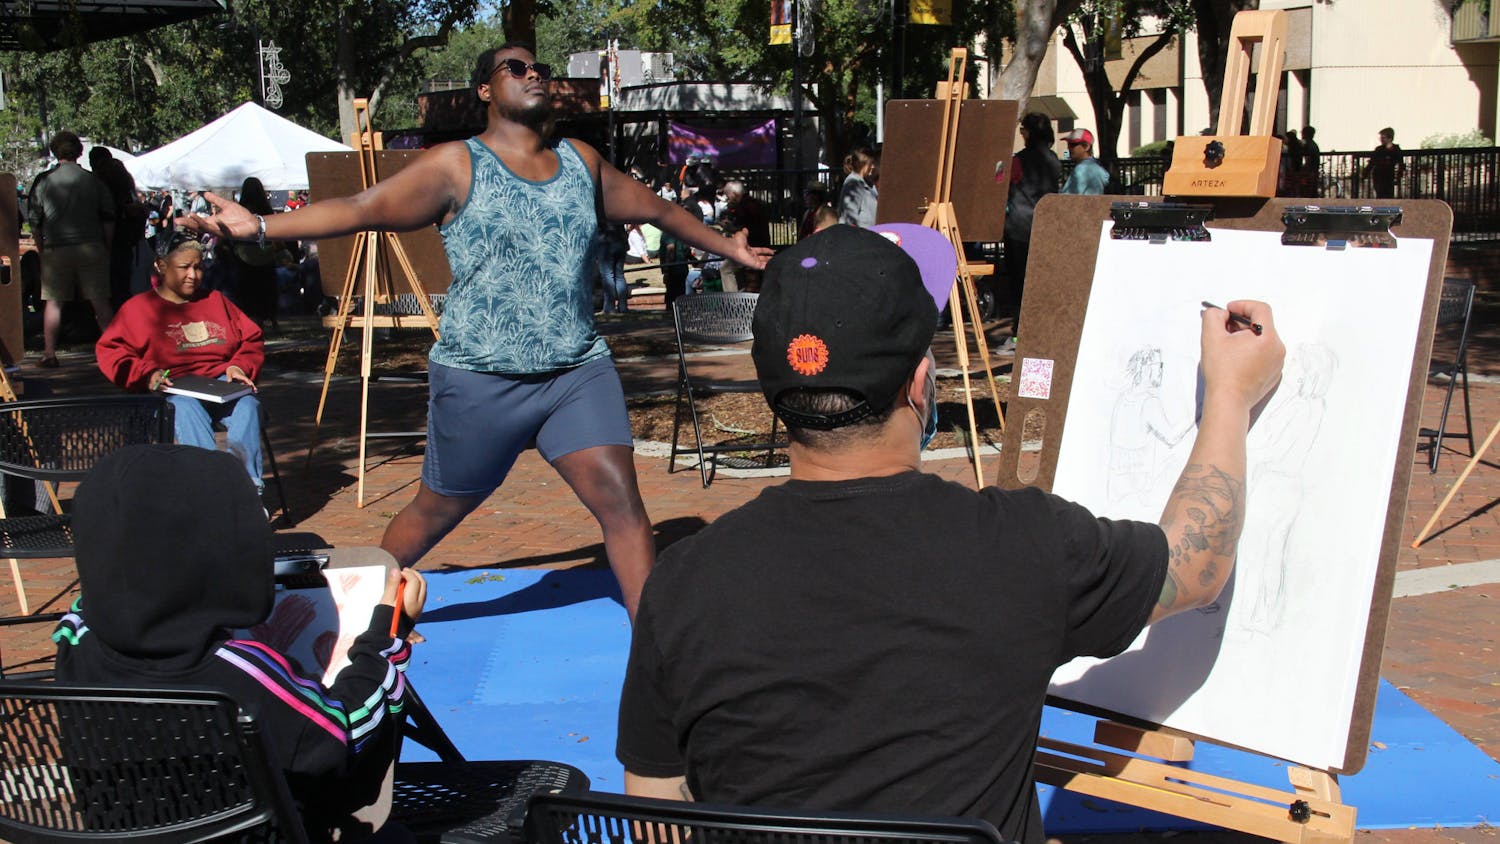 Amarisa Harrison-Conwill, (left) 5, and her father Mo Harrison-Conwill (right) draw during the 40th Downtown Festival & Art Show at Bo Diddley Plaza on Sunday, Nov. 7, 2021. "Daddy's an artist," Amarisa said.